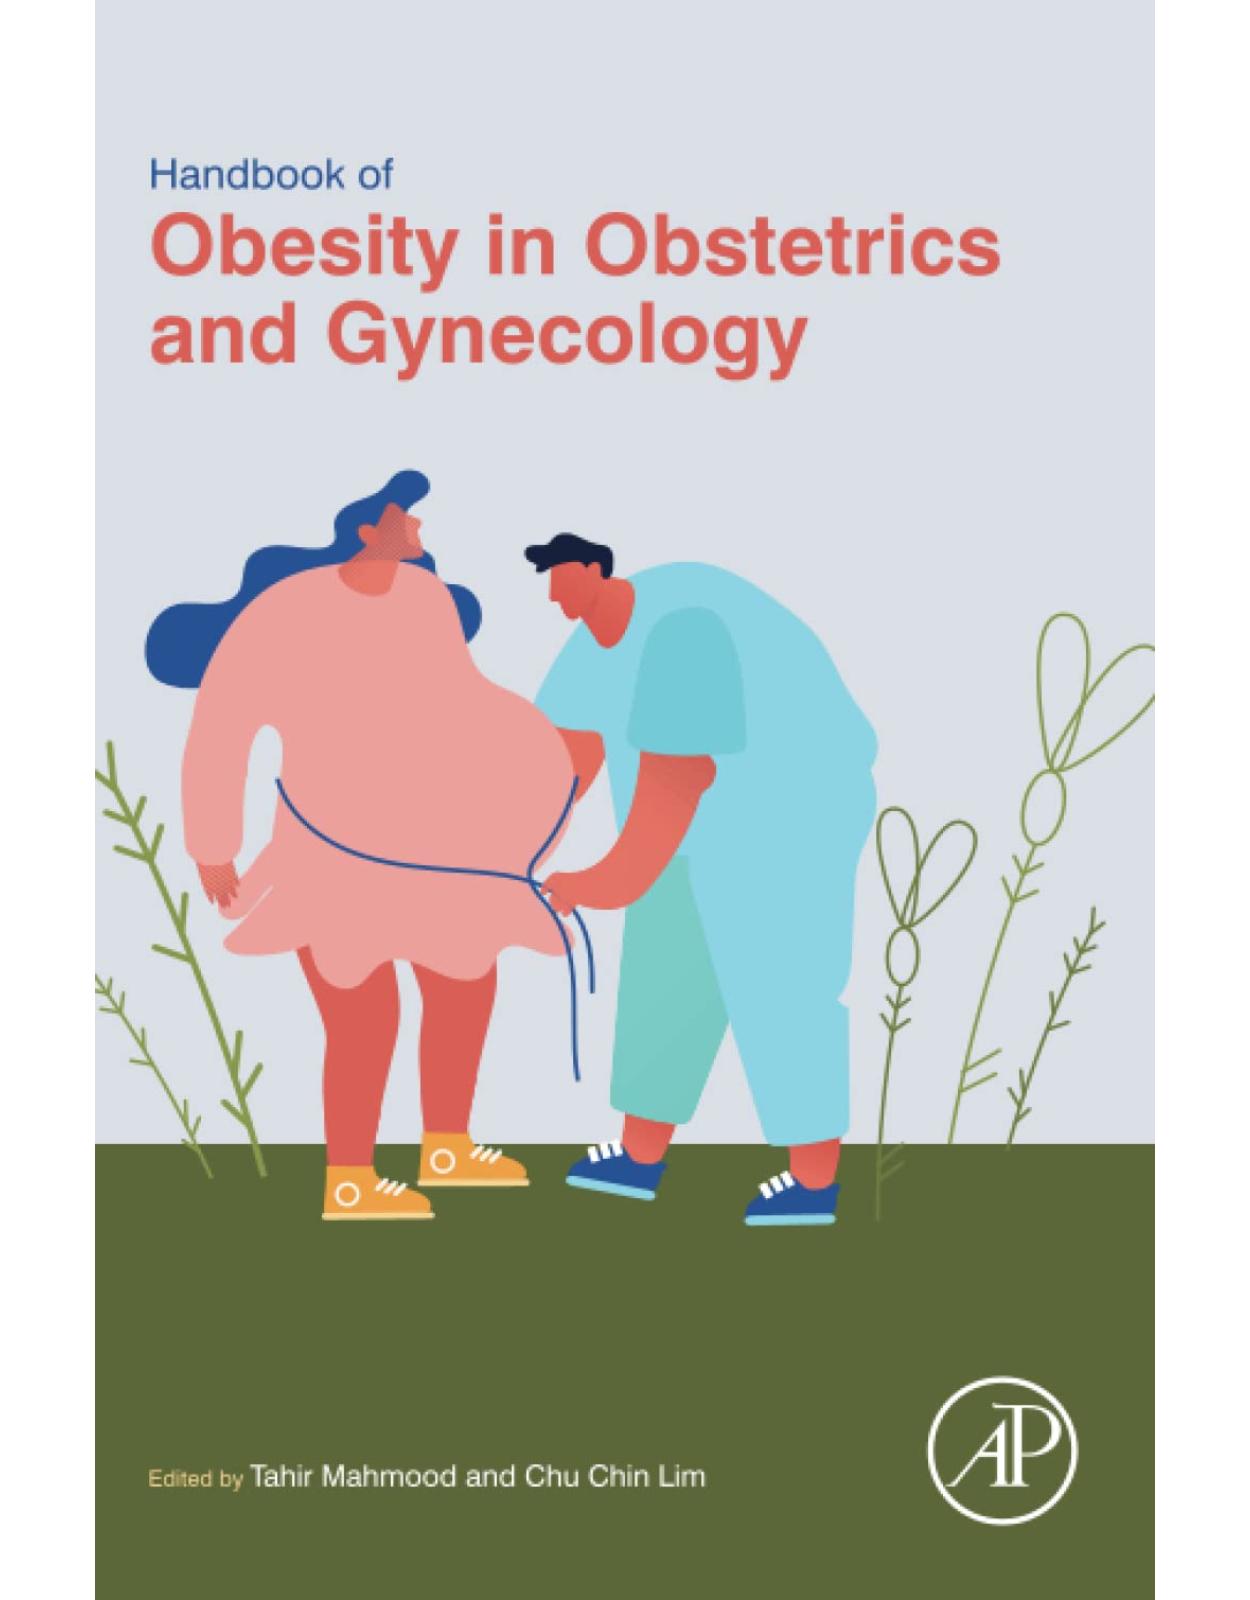 Handbook of Obesity in Obstetrics and Gynecology